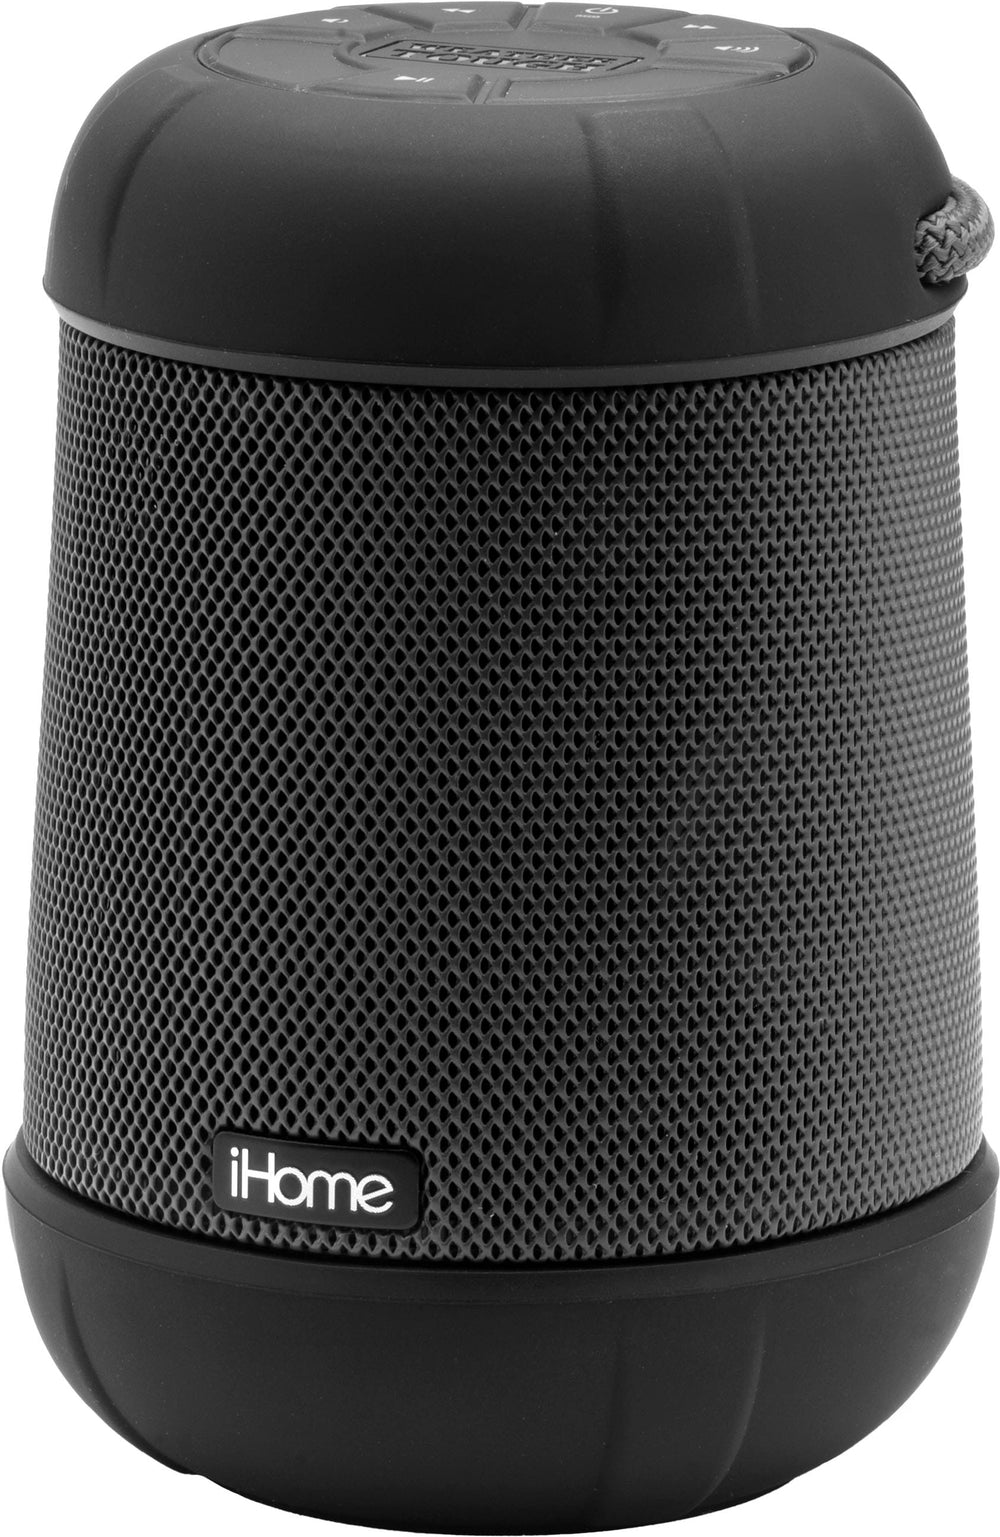 iHome - PlayTough Pro - Bluetooth Rechargeable Waterproof Portable Speaker with 360° Stereo Sound - Black_1